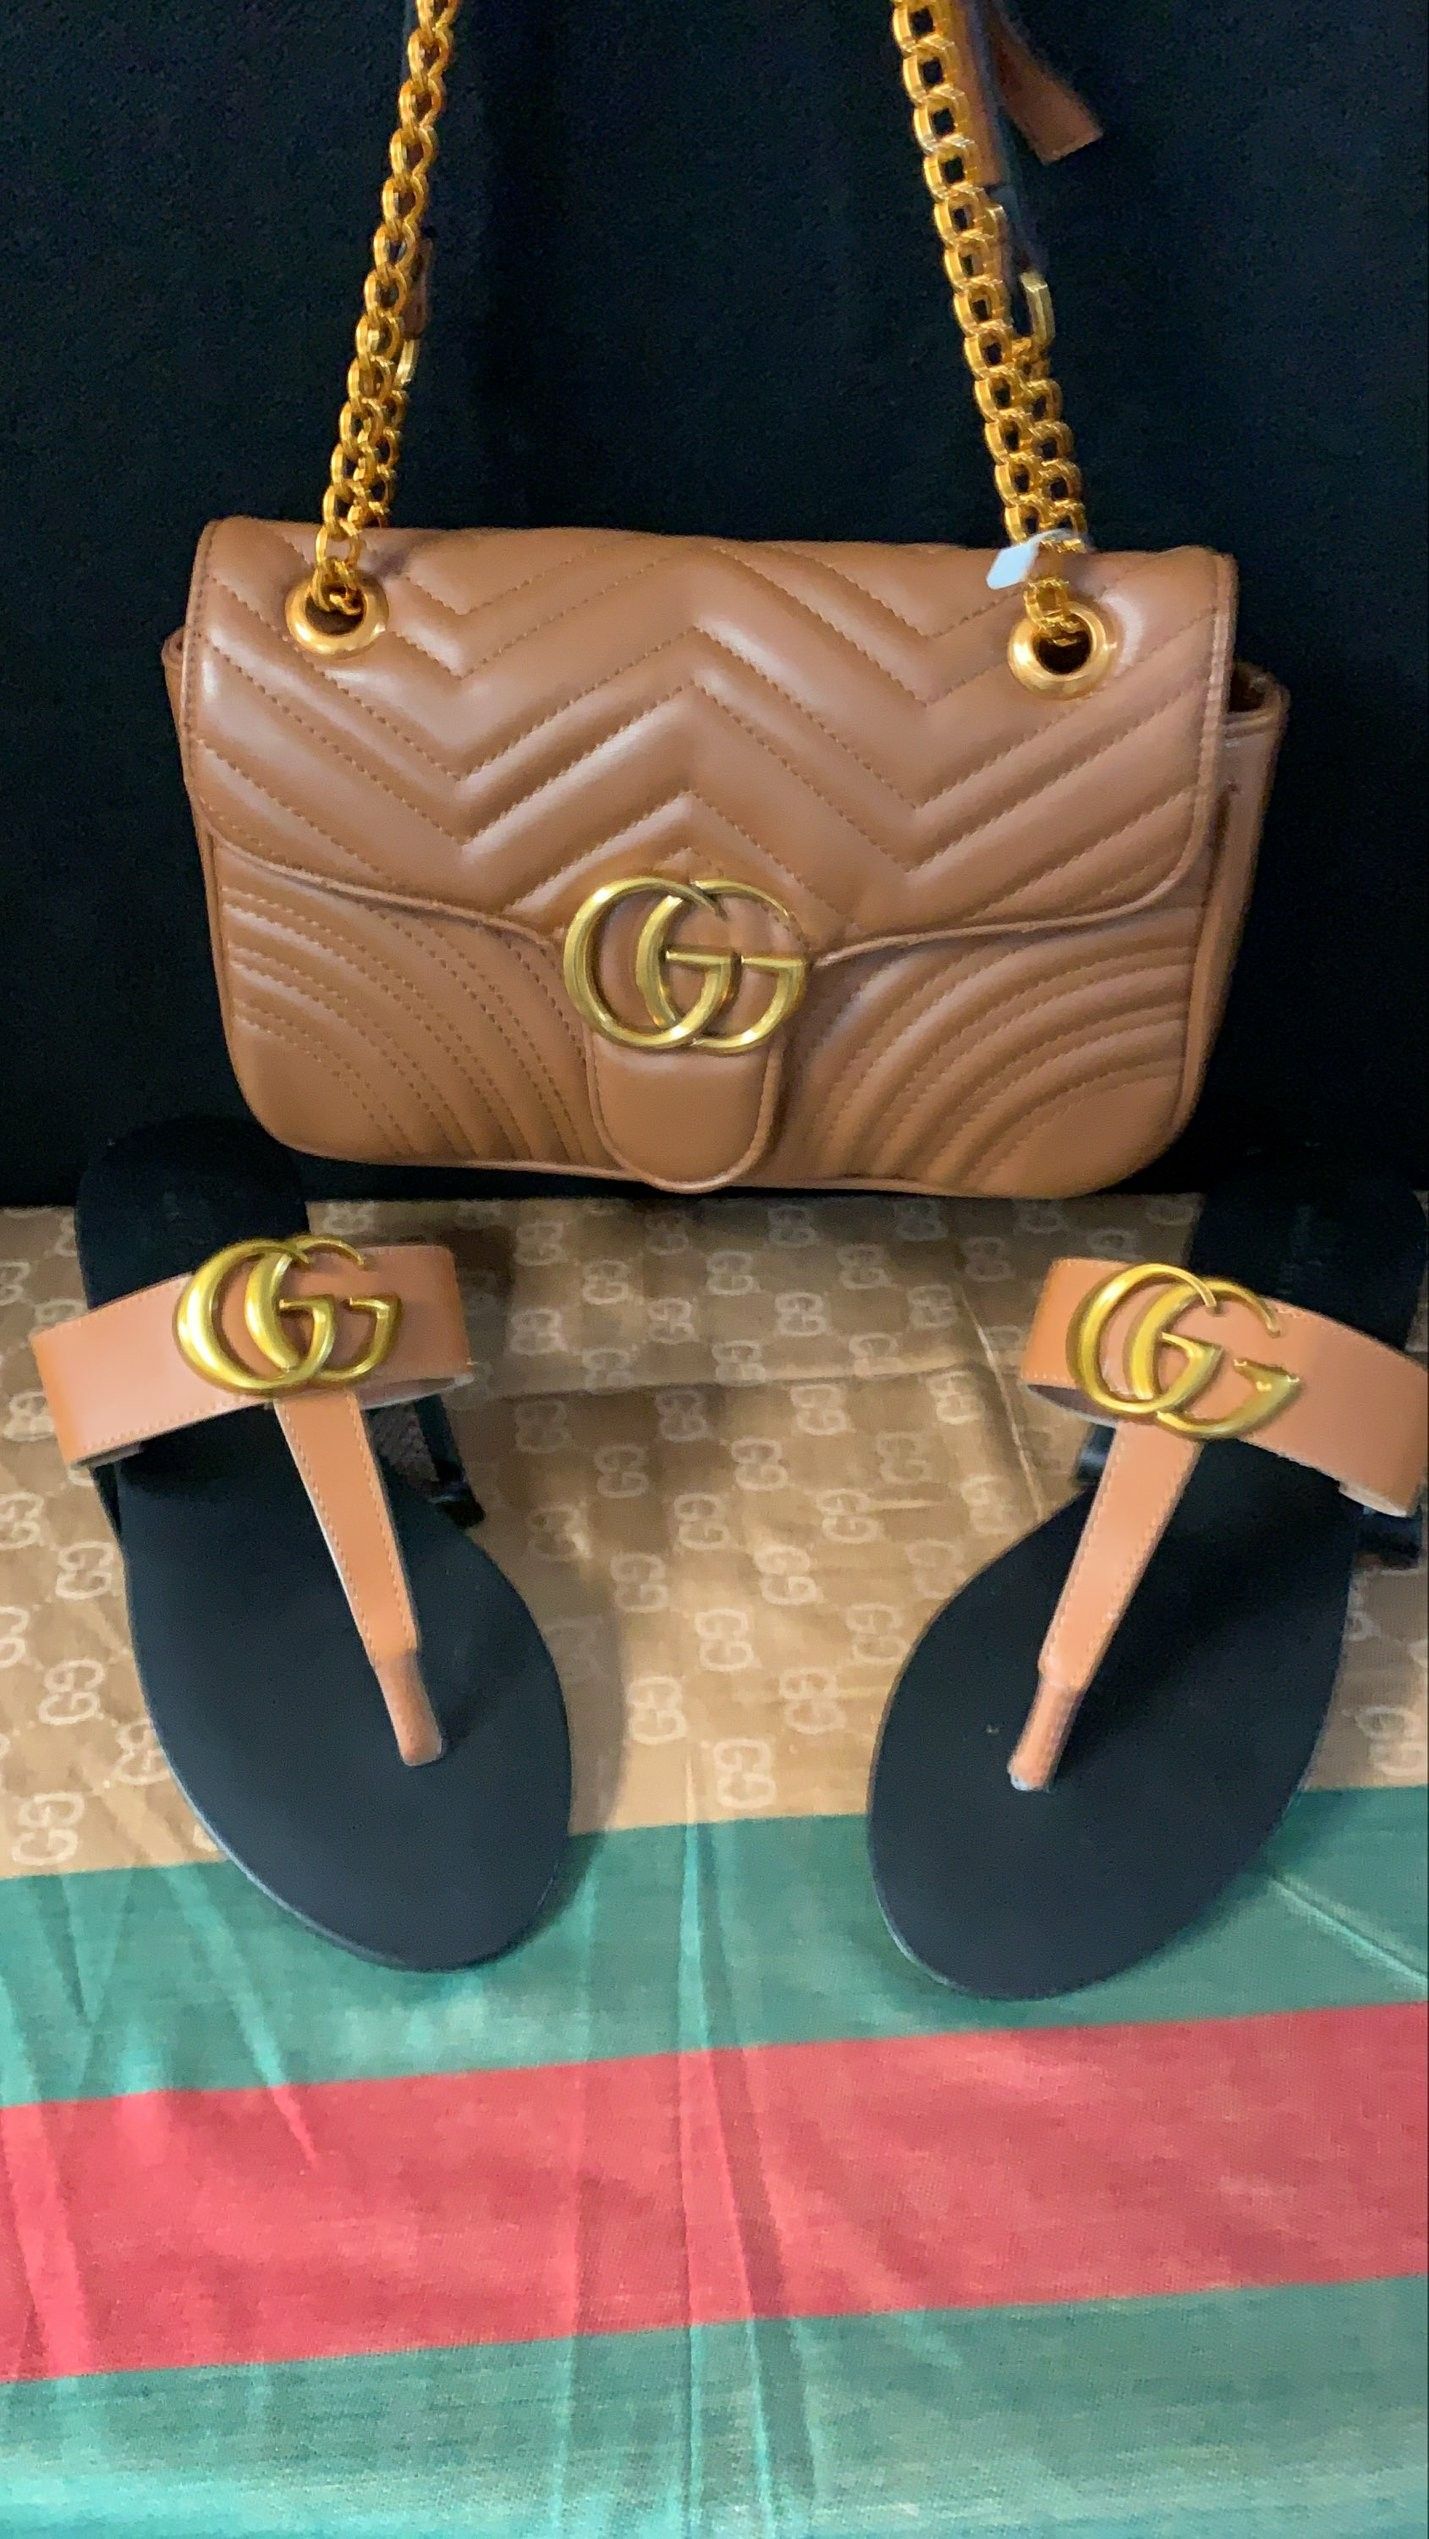 Purse and Sandals